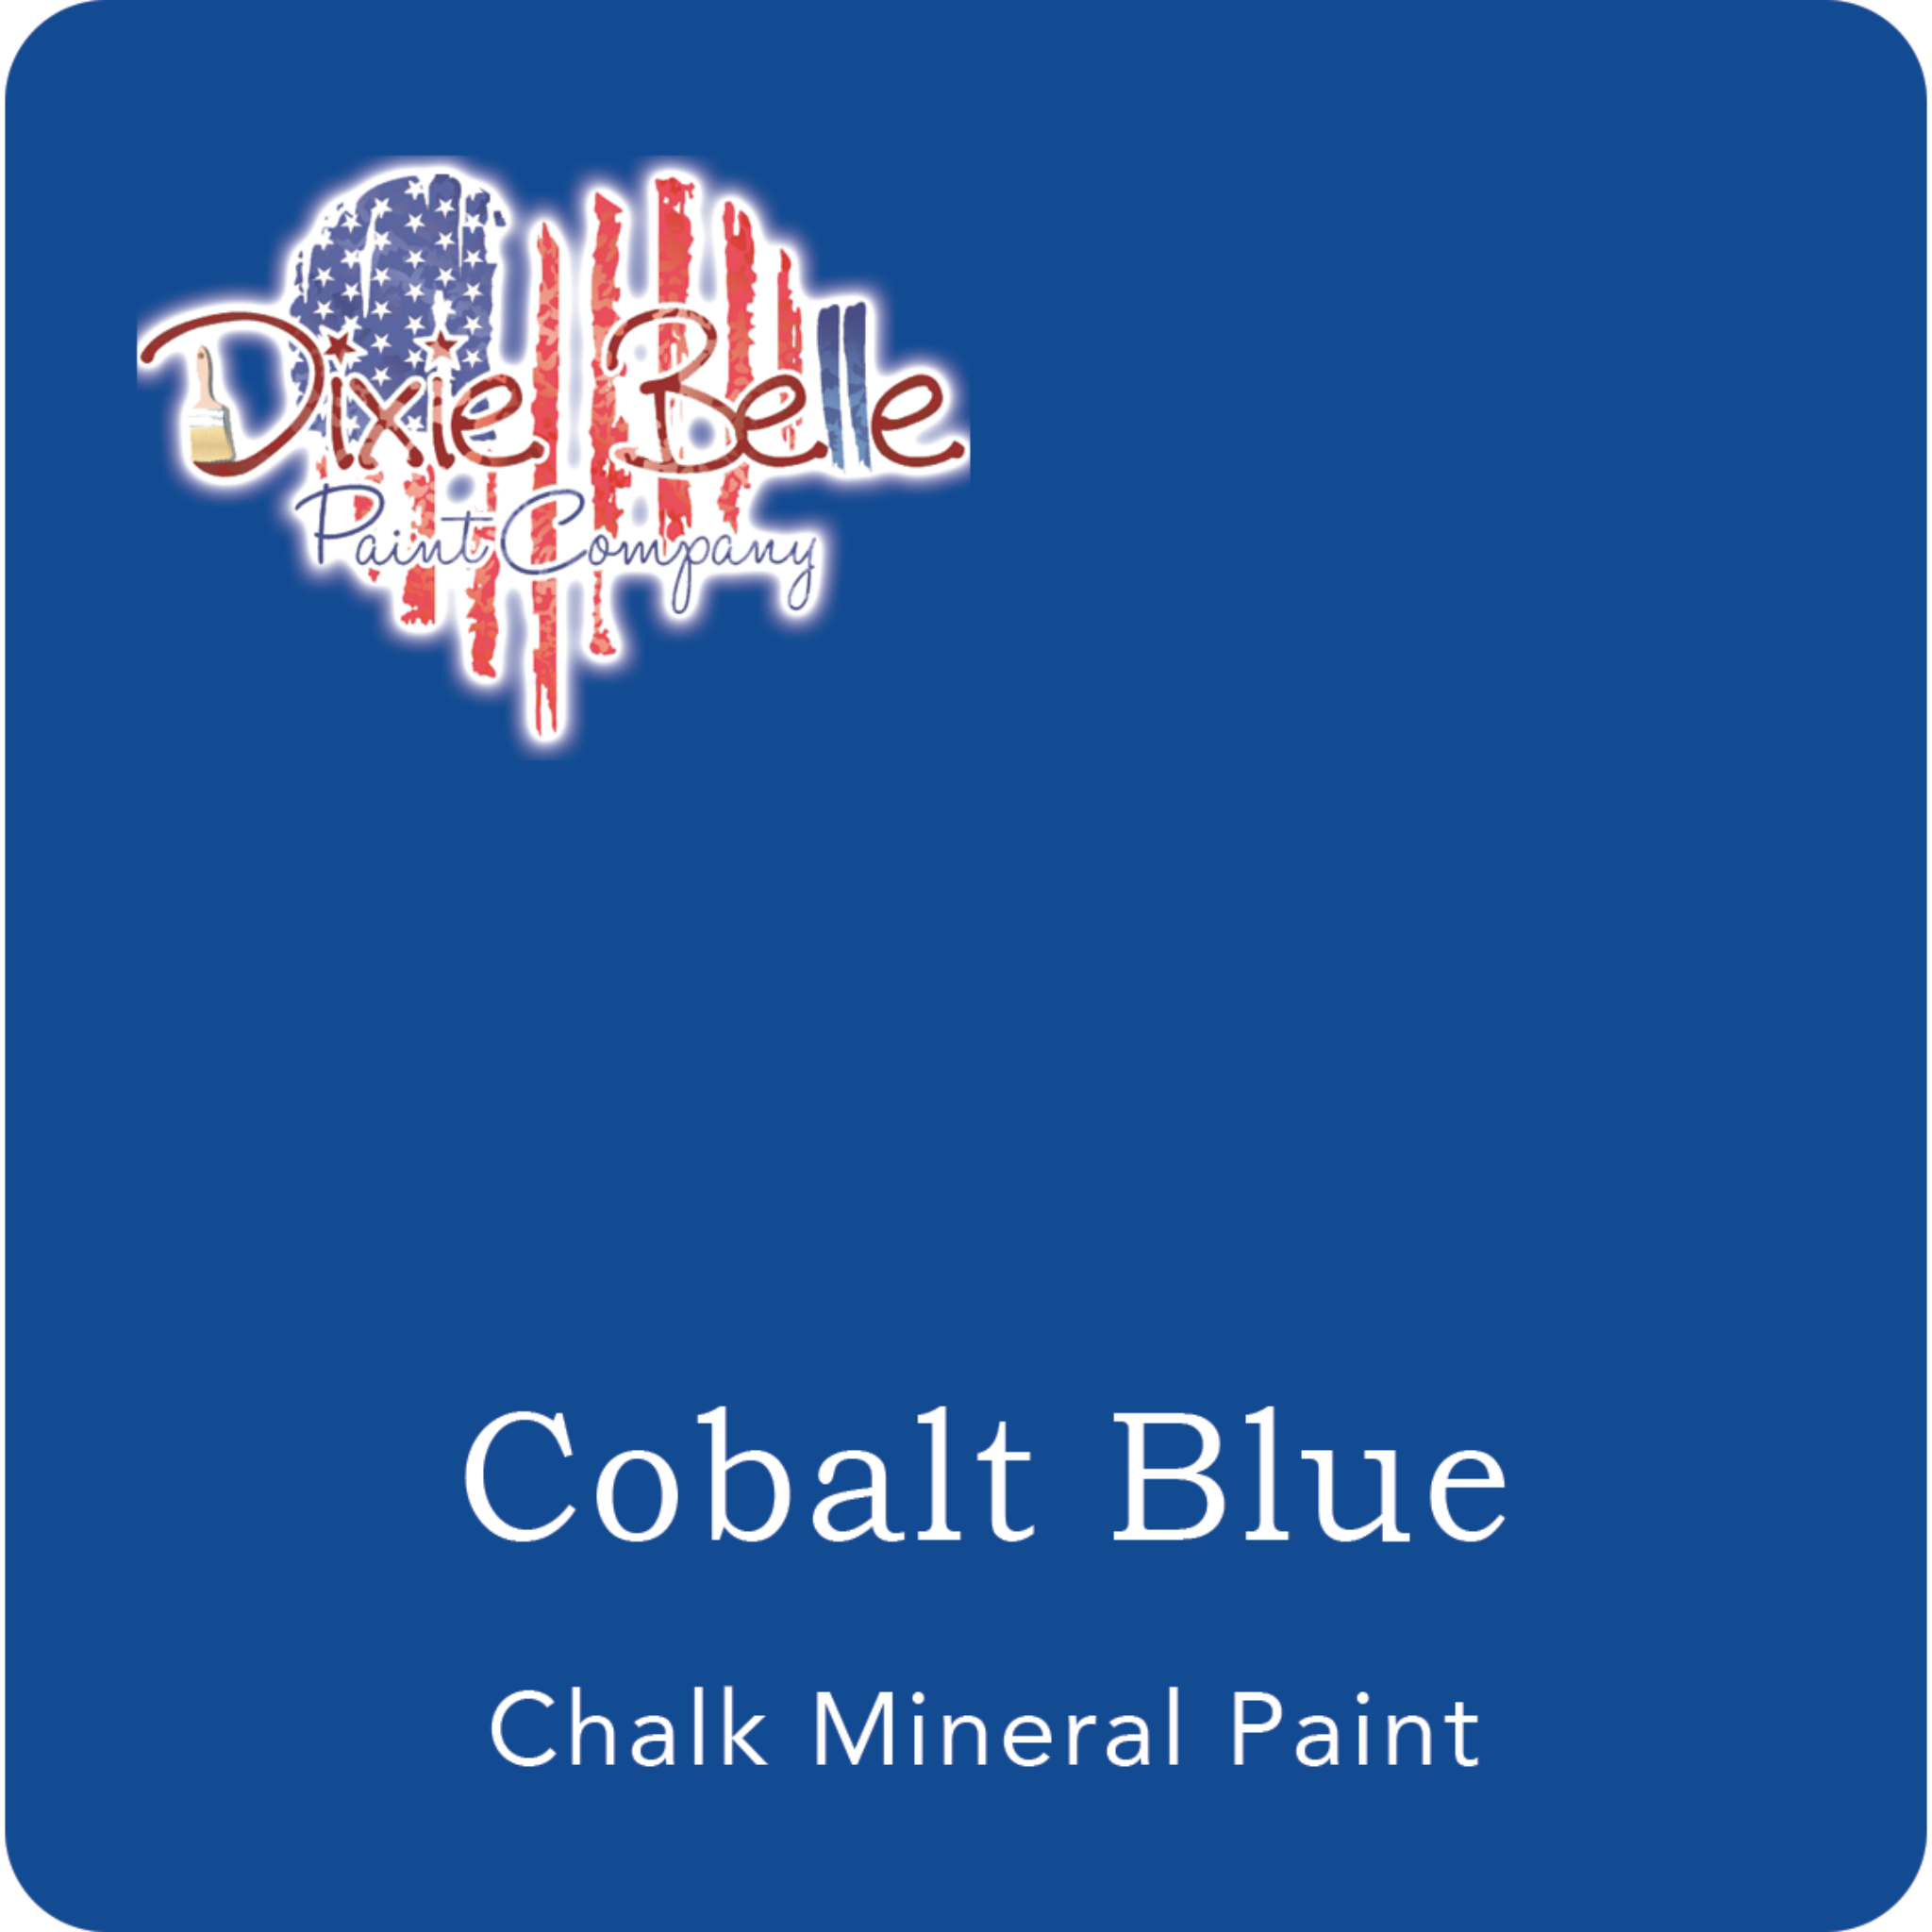 A square swatch card of Dixie Belle Paint Company’s Chocolate Chalk Mineral Paint. This color is a bright vibrant blue.